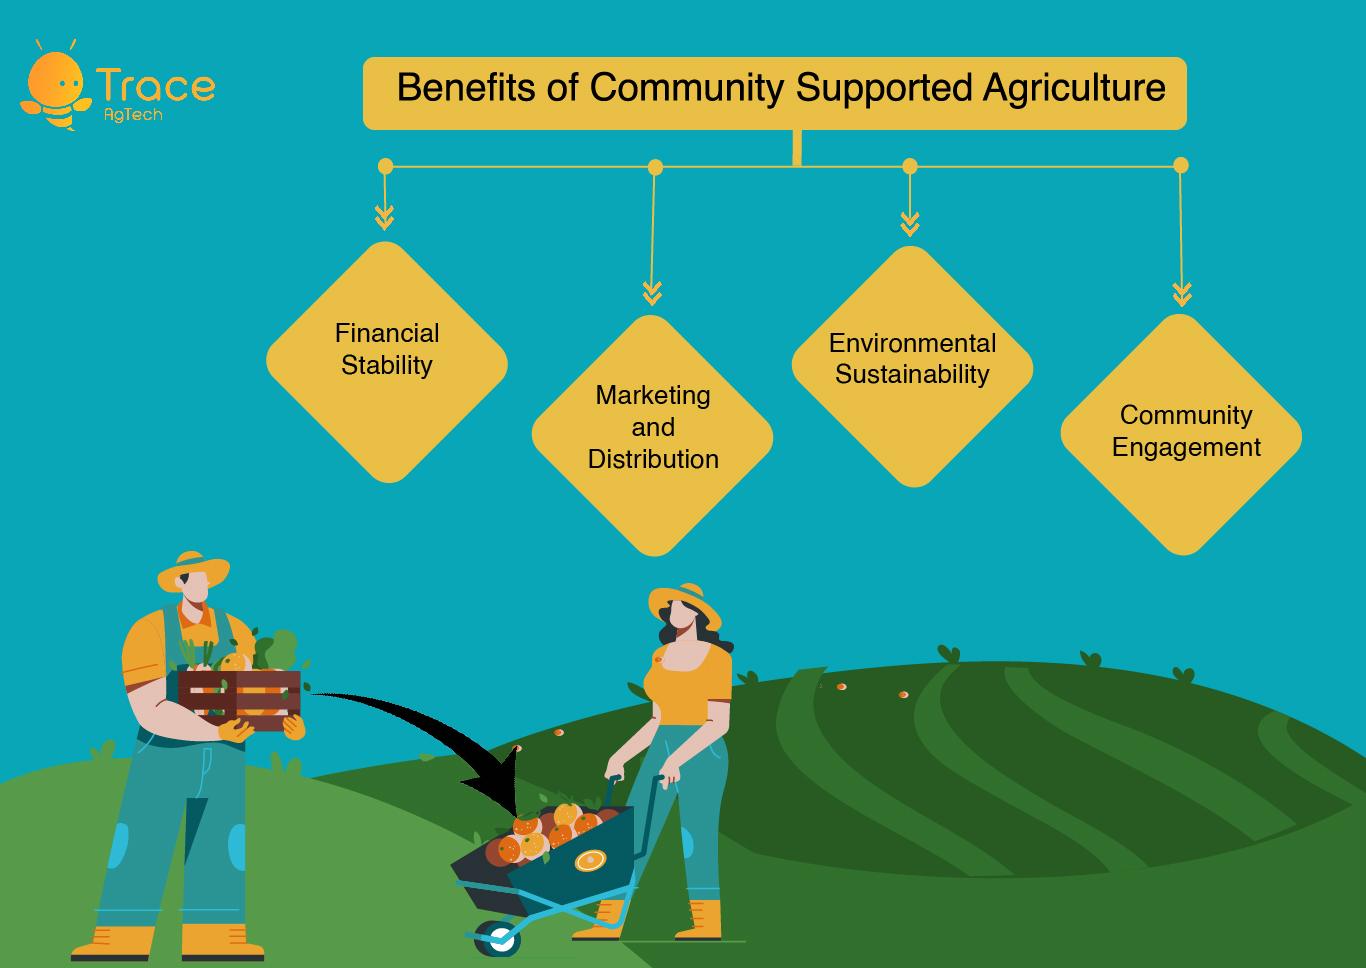 Benefits of Community Supported Agriculture